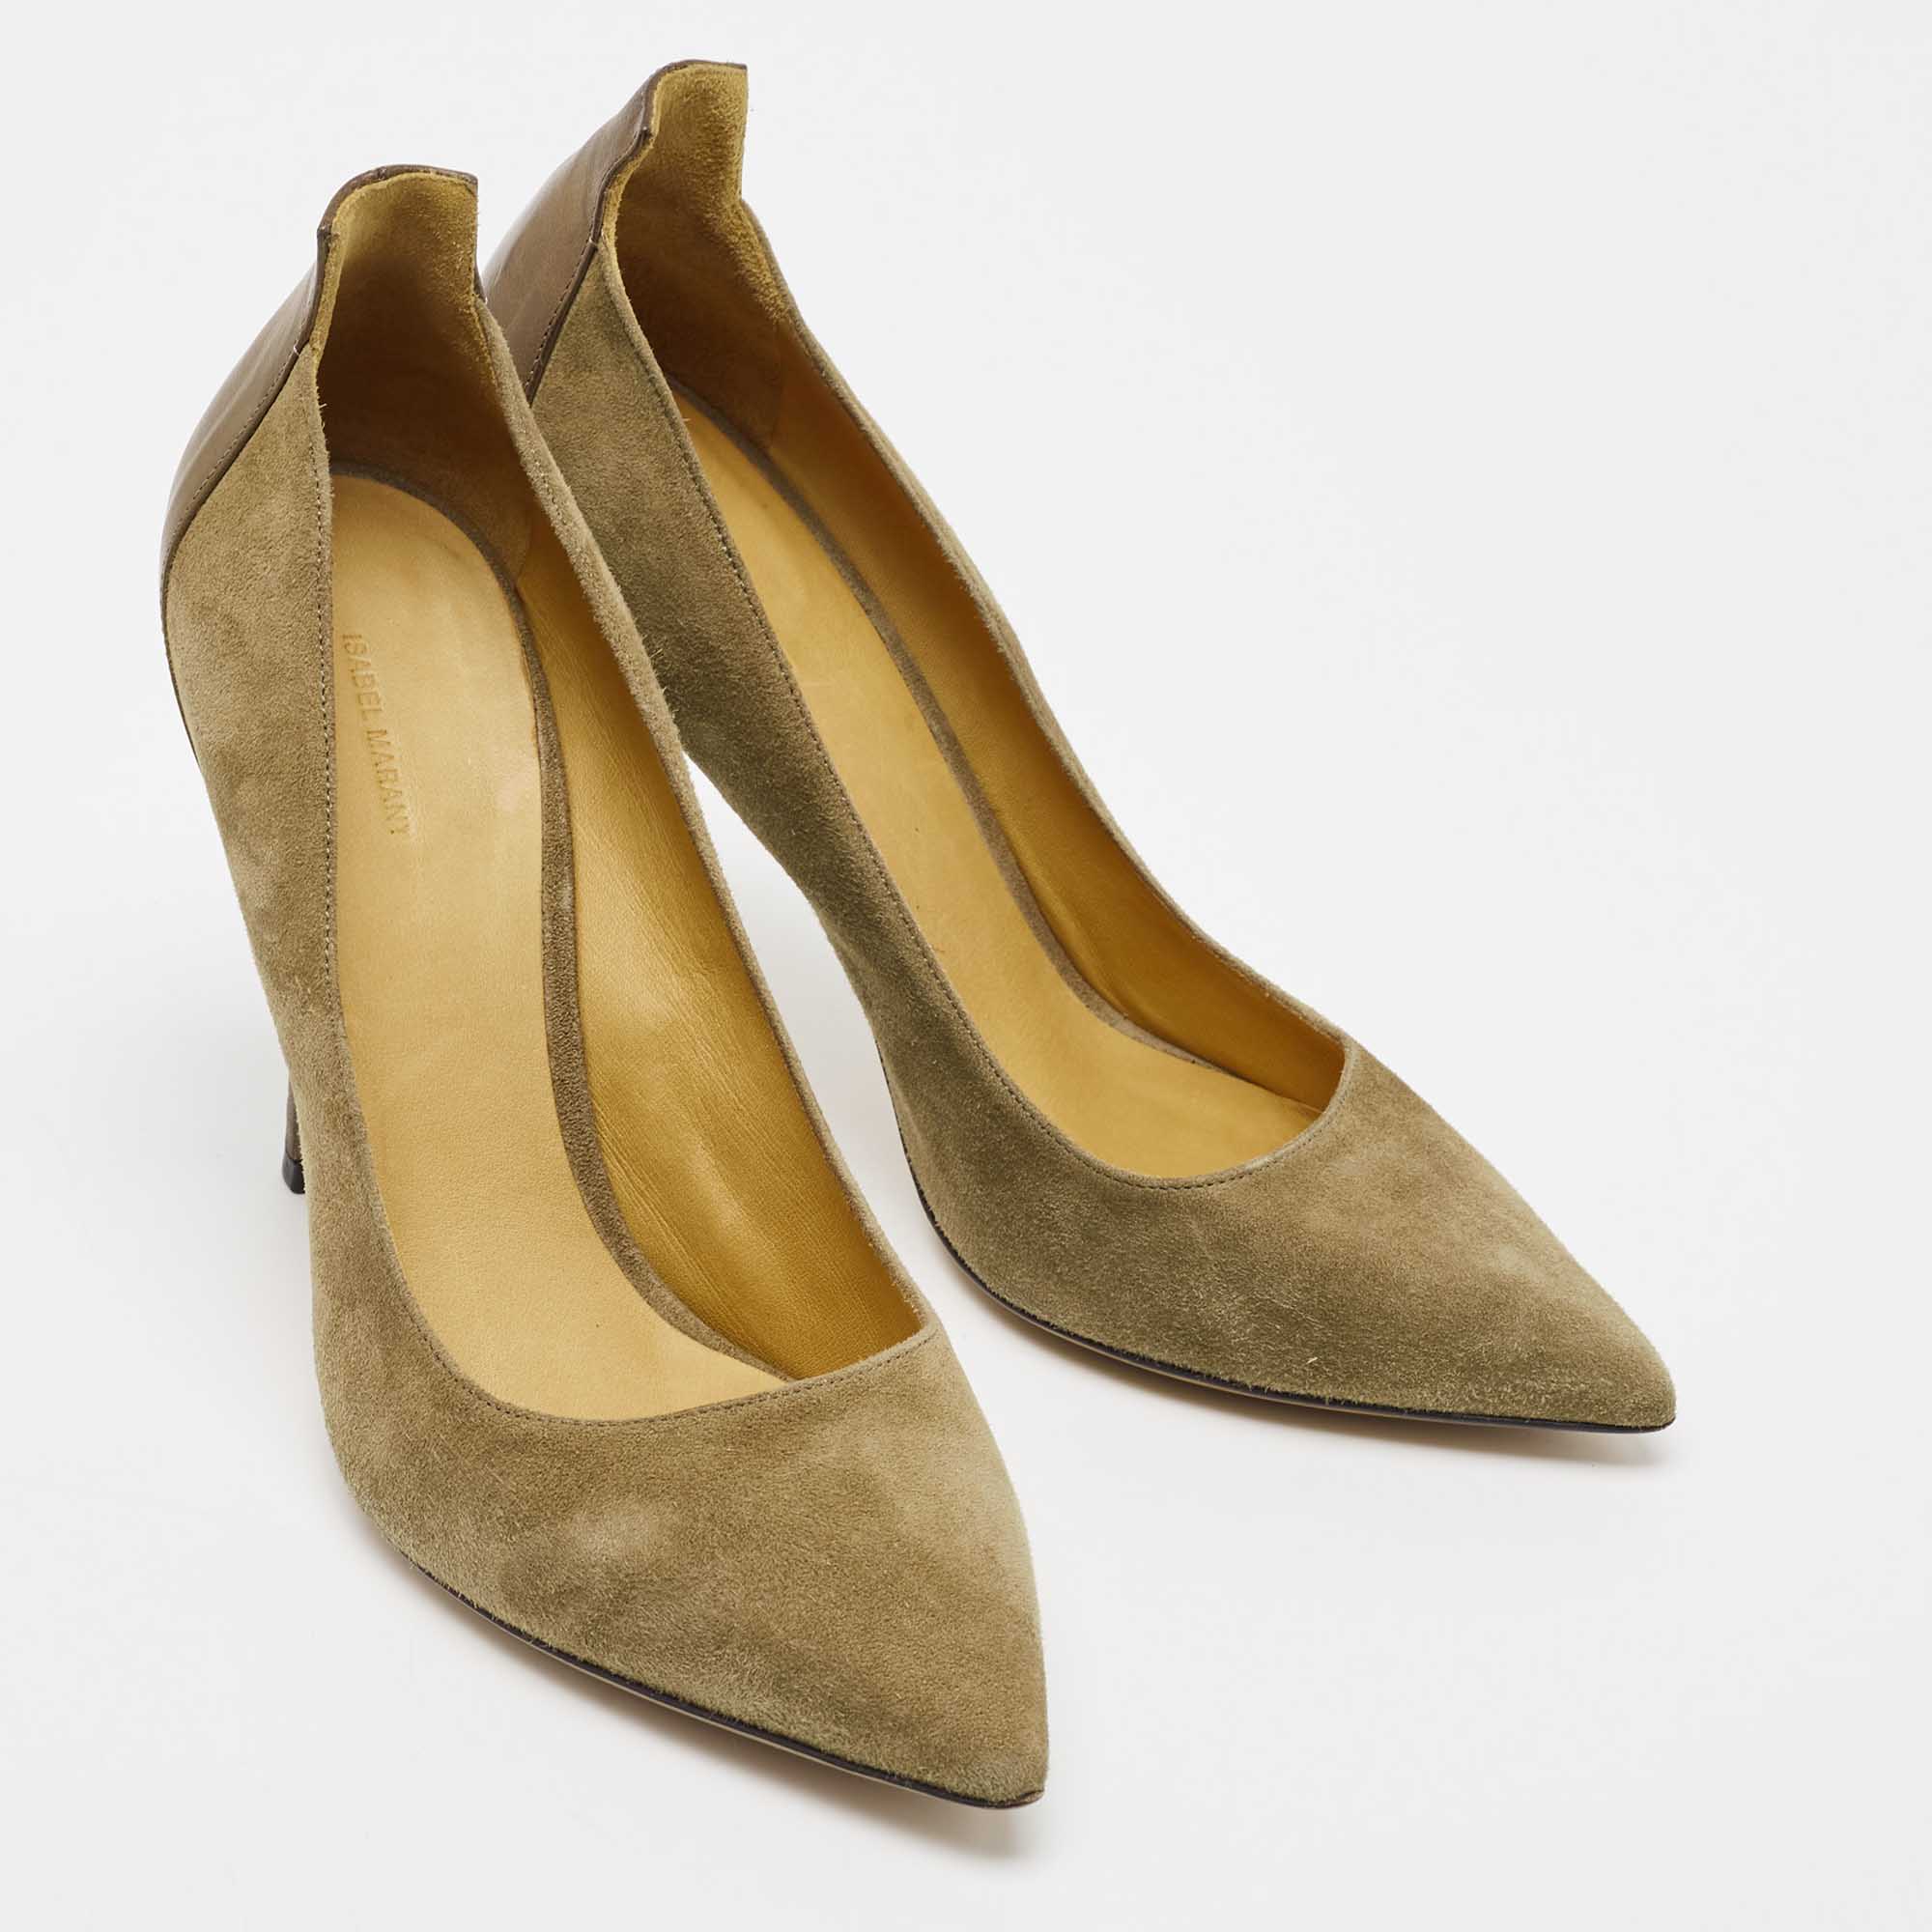 Isabel Marant Olive Green Suede And Leather Pointed Toe Pumps Size 38